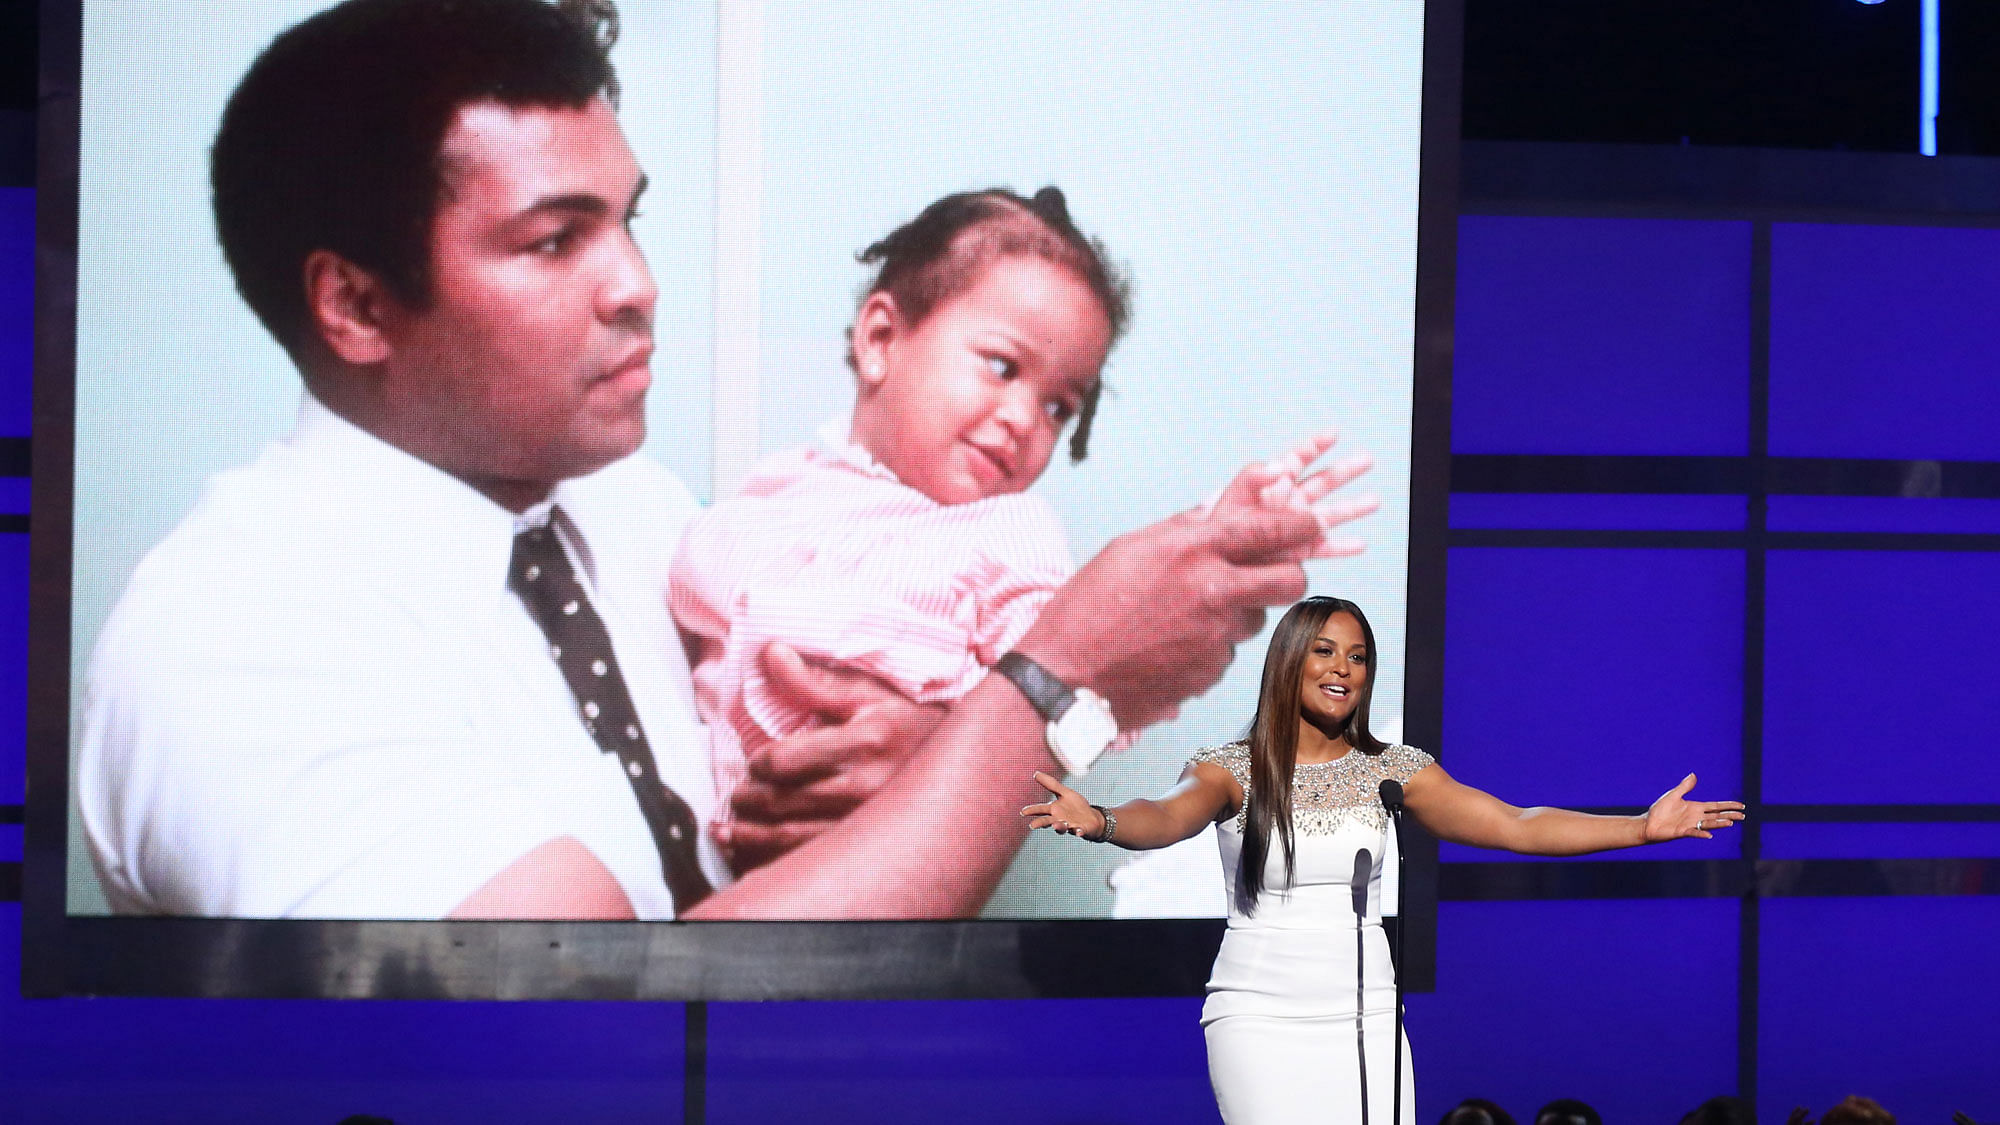 Laila Ali speaks during a tribute to her late father, Muhammad Ali, at the BET Awards at the Microsoft Theater on Sunday. (Photo: AP)